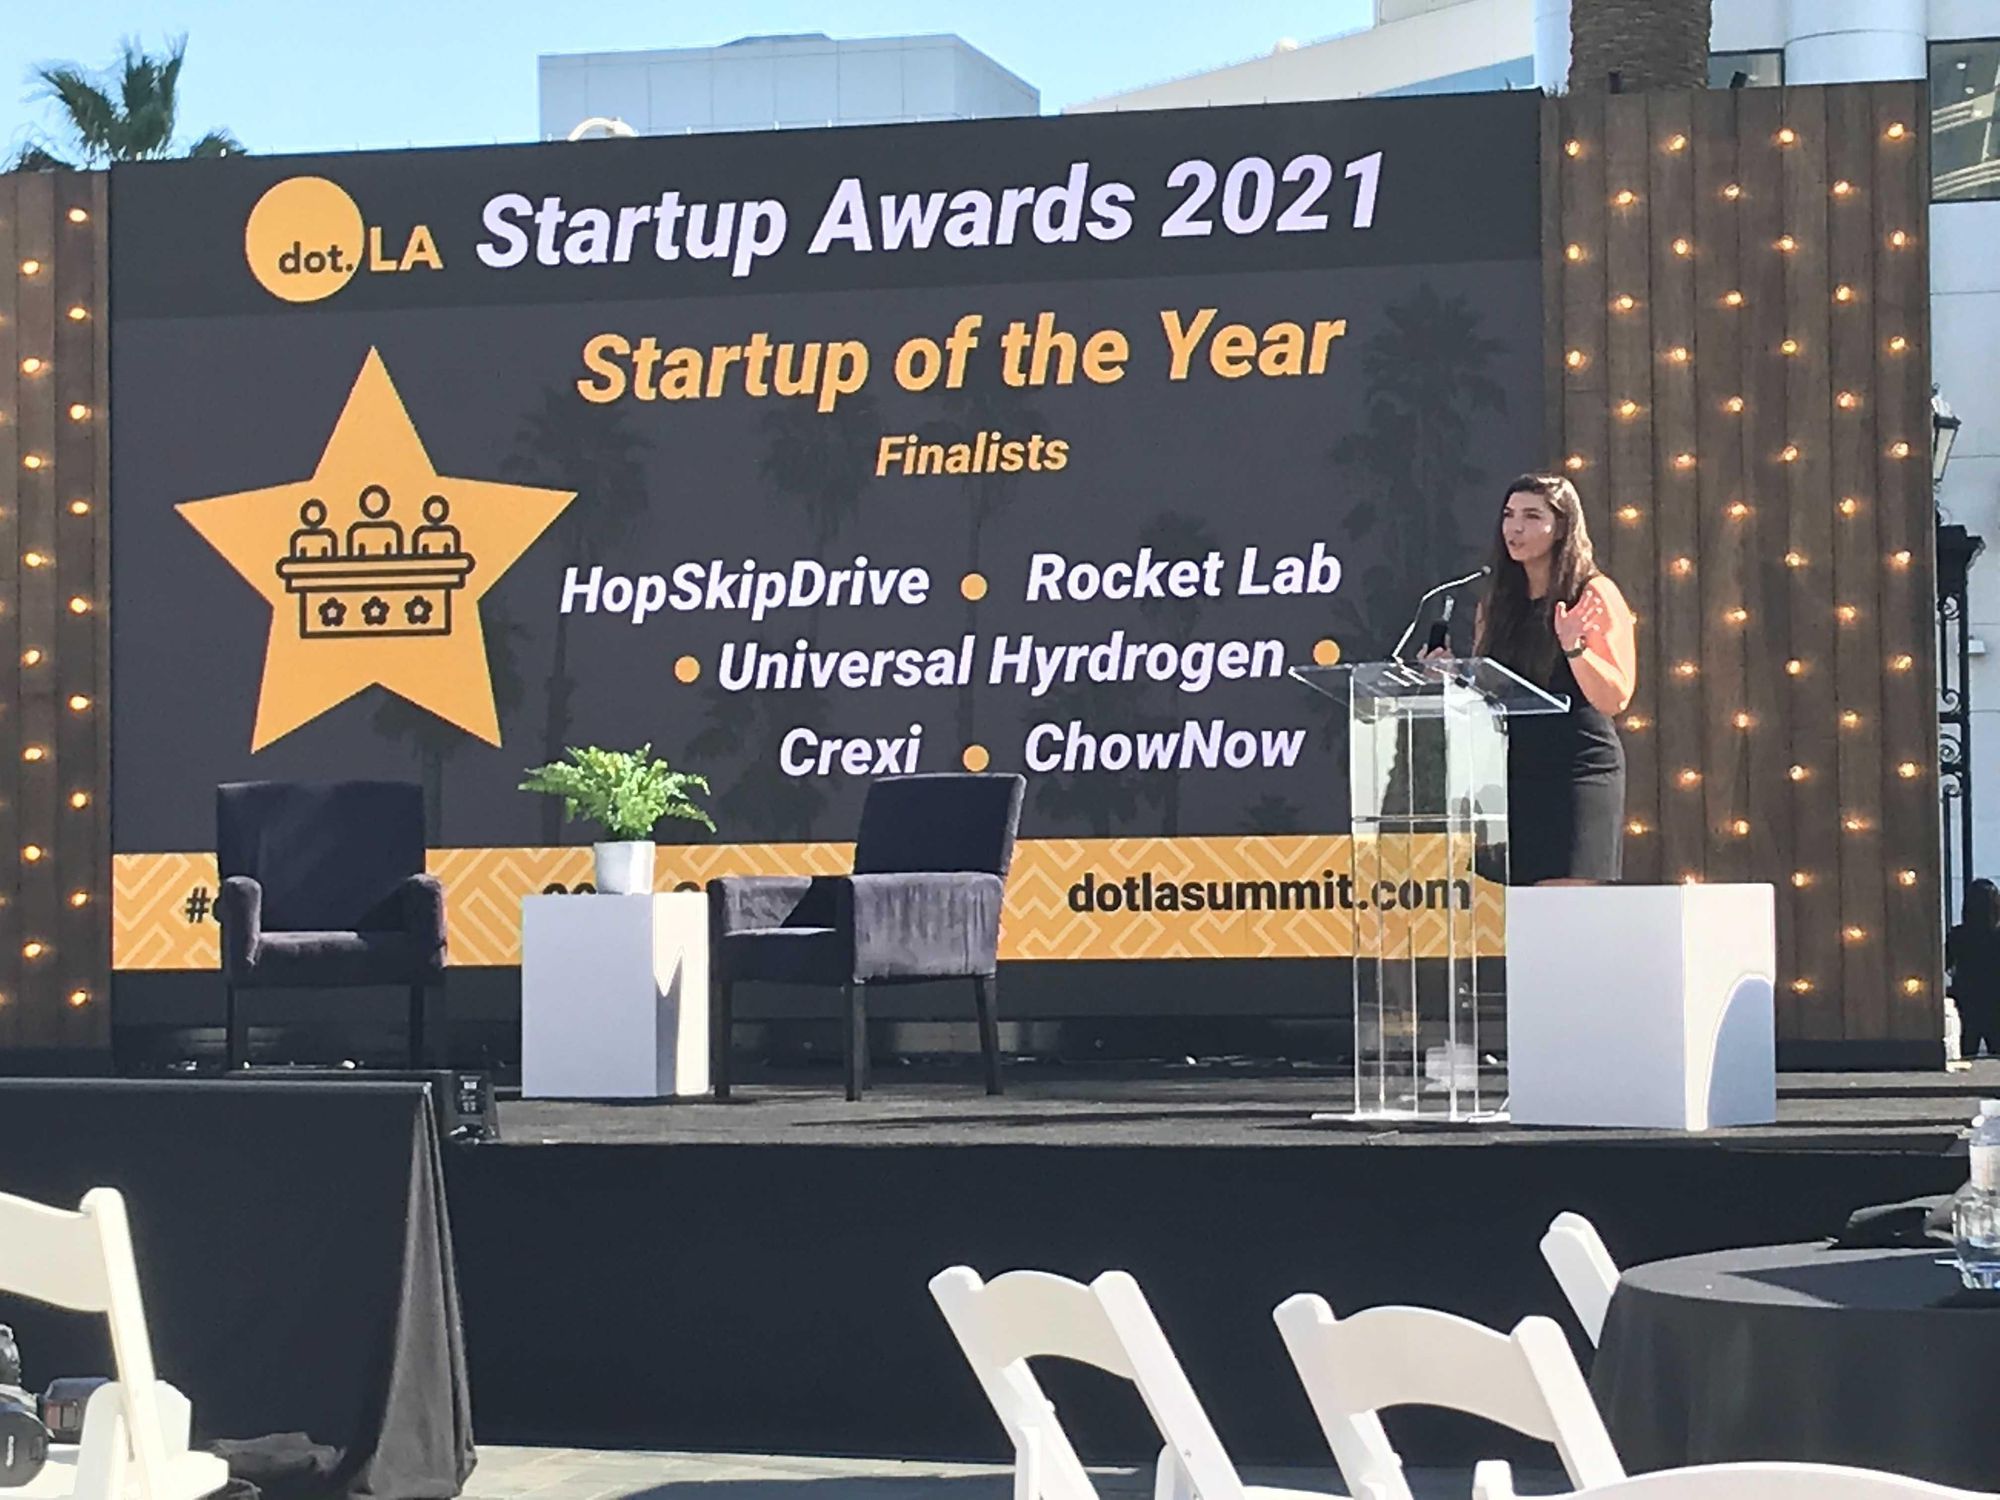 HopSkipDrive Wins Startup of the Year at dot.LA's Second Annual Startup Awards